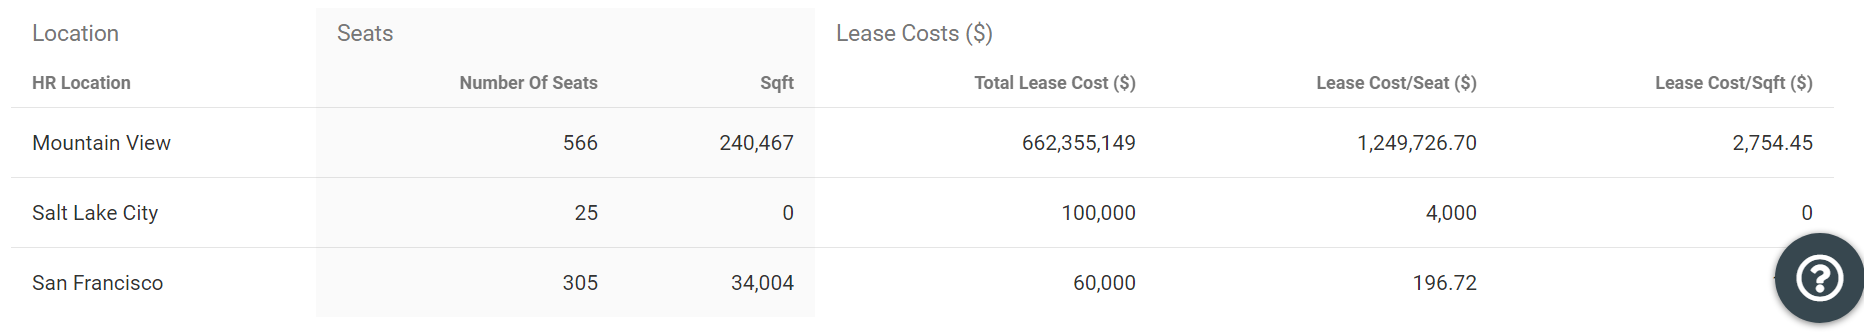 lease_cost_location3.png